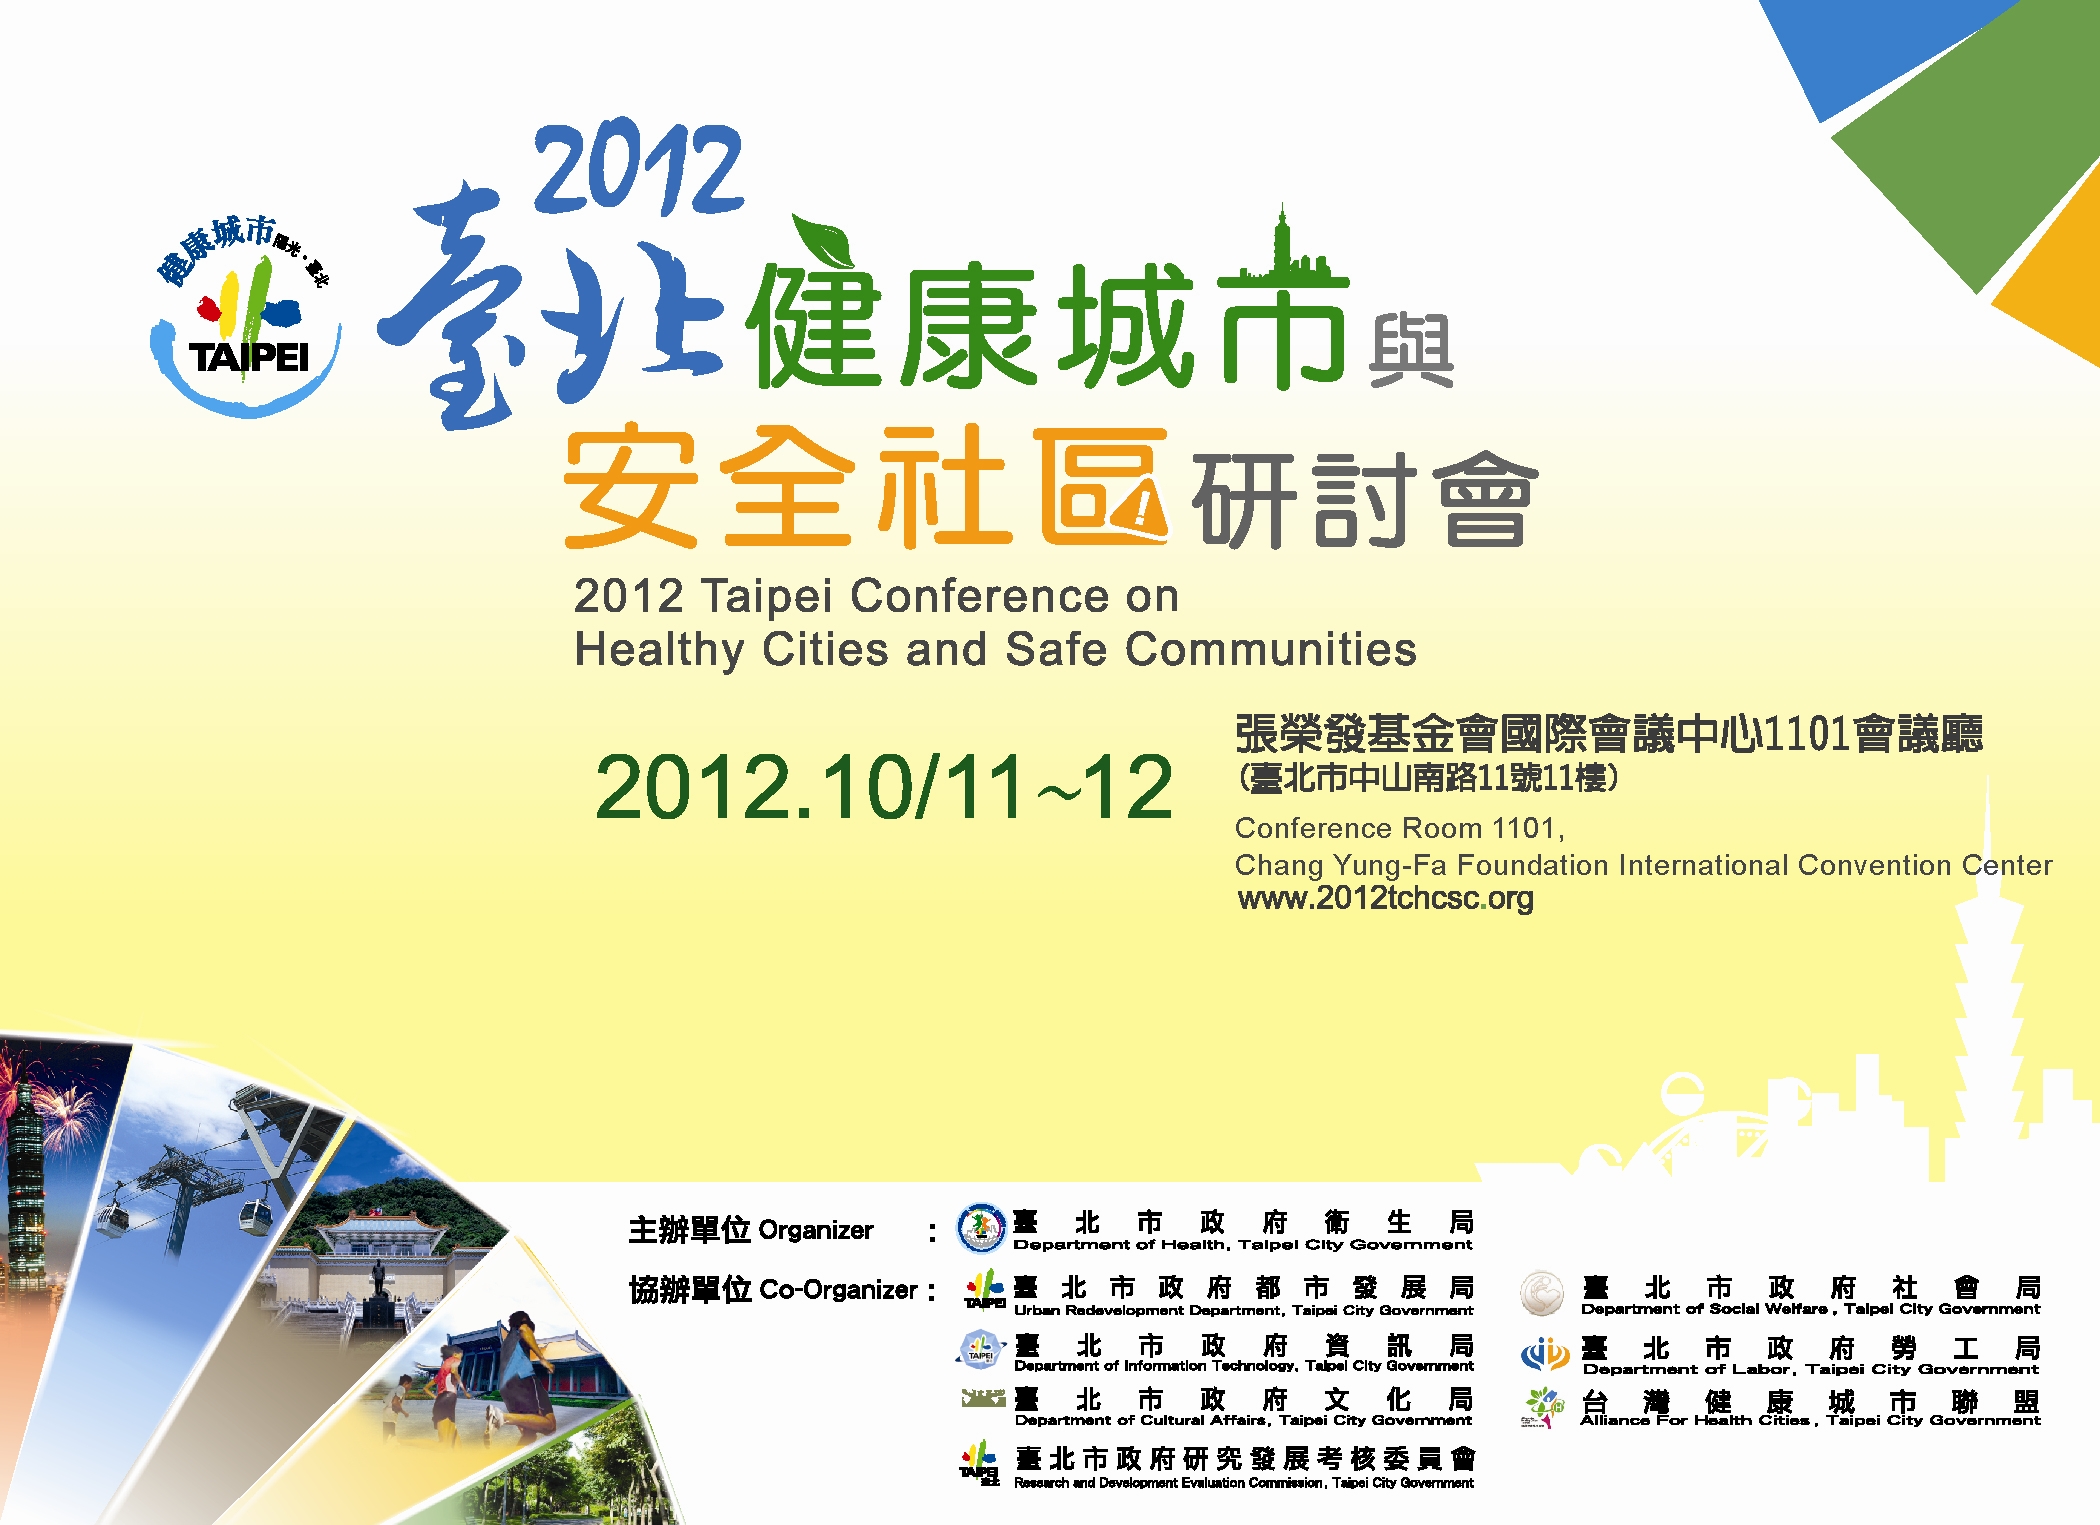 2012 Taipei Conference on Healthy Cities and Safe Communities, welcome!